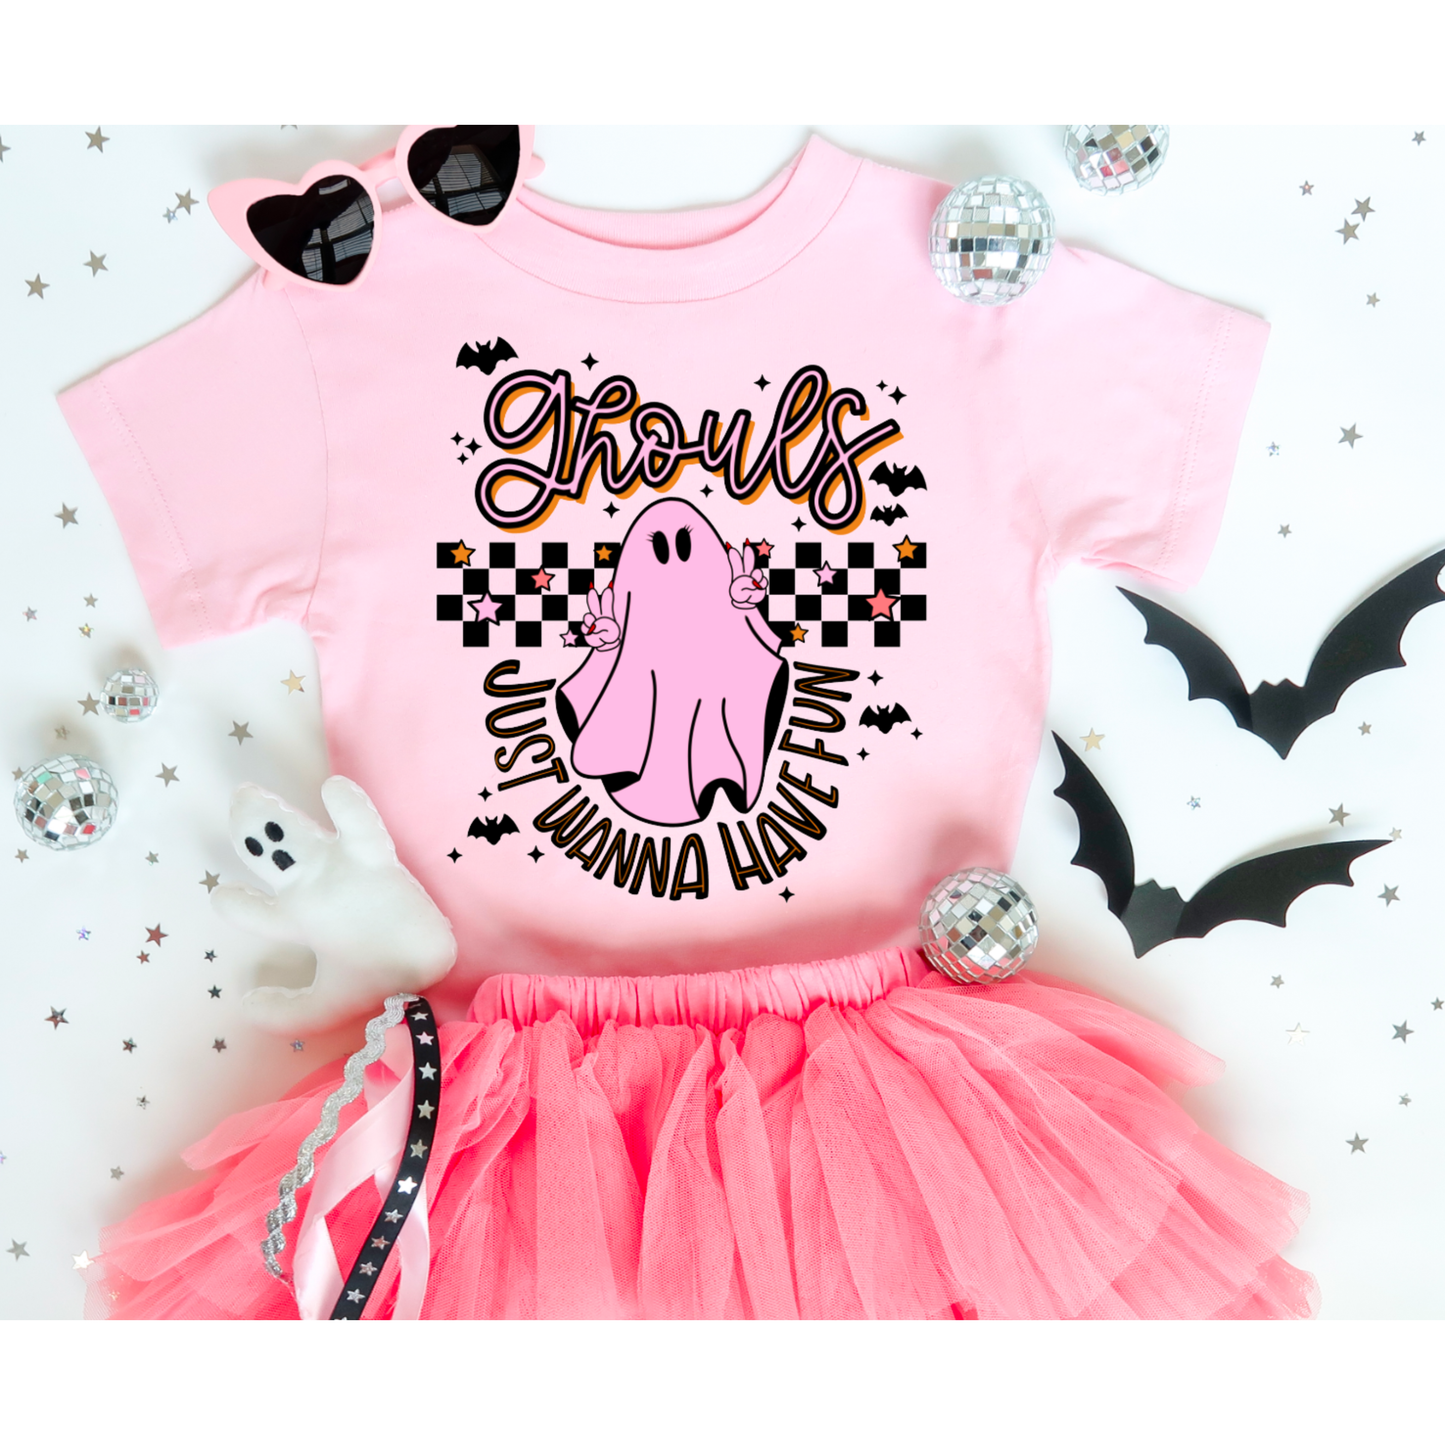 Ghouls just wanna have fun - Pink Bella+Canvas